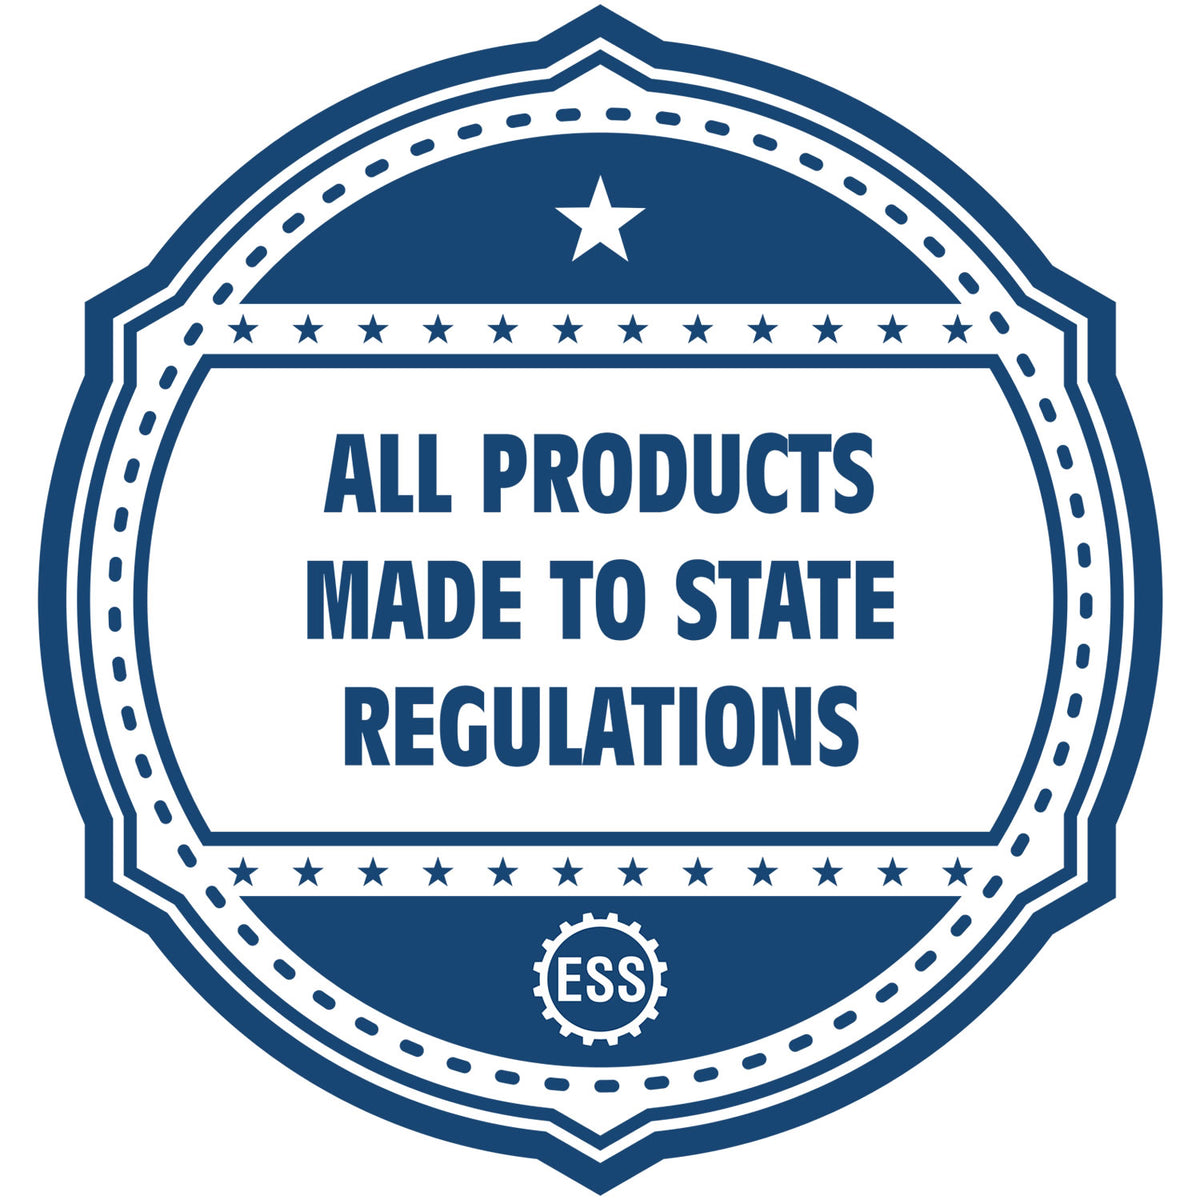 An icon or badge element for the Oklahoma Engineer Desk Seal showing that this product is made in compliance with state regulations.